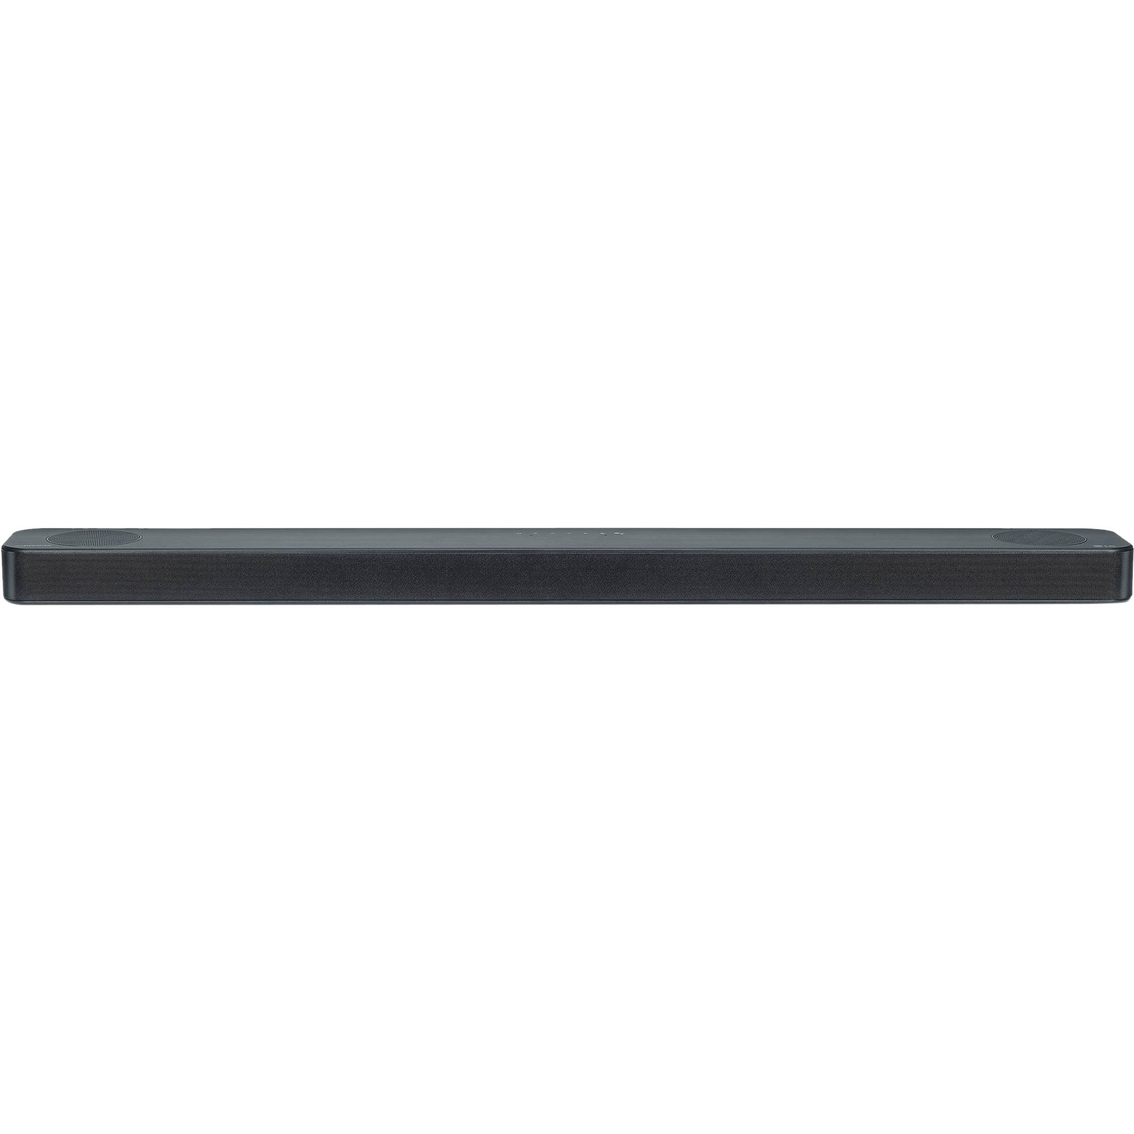 LG SL8YG 3.1.2 ch High Res Audio Soundbar with Dolby Atmos and Google Assistant - Image 2 of 10